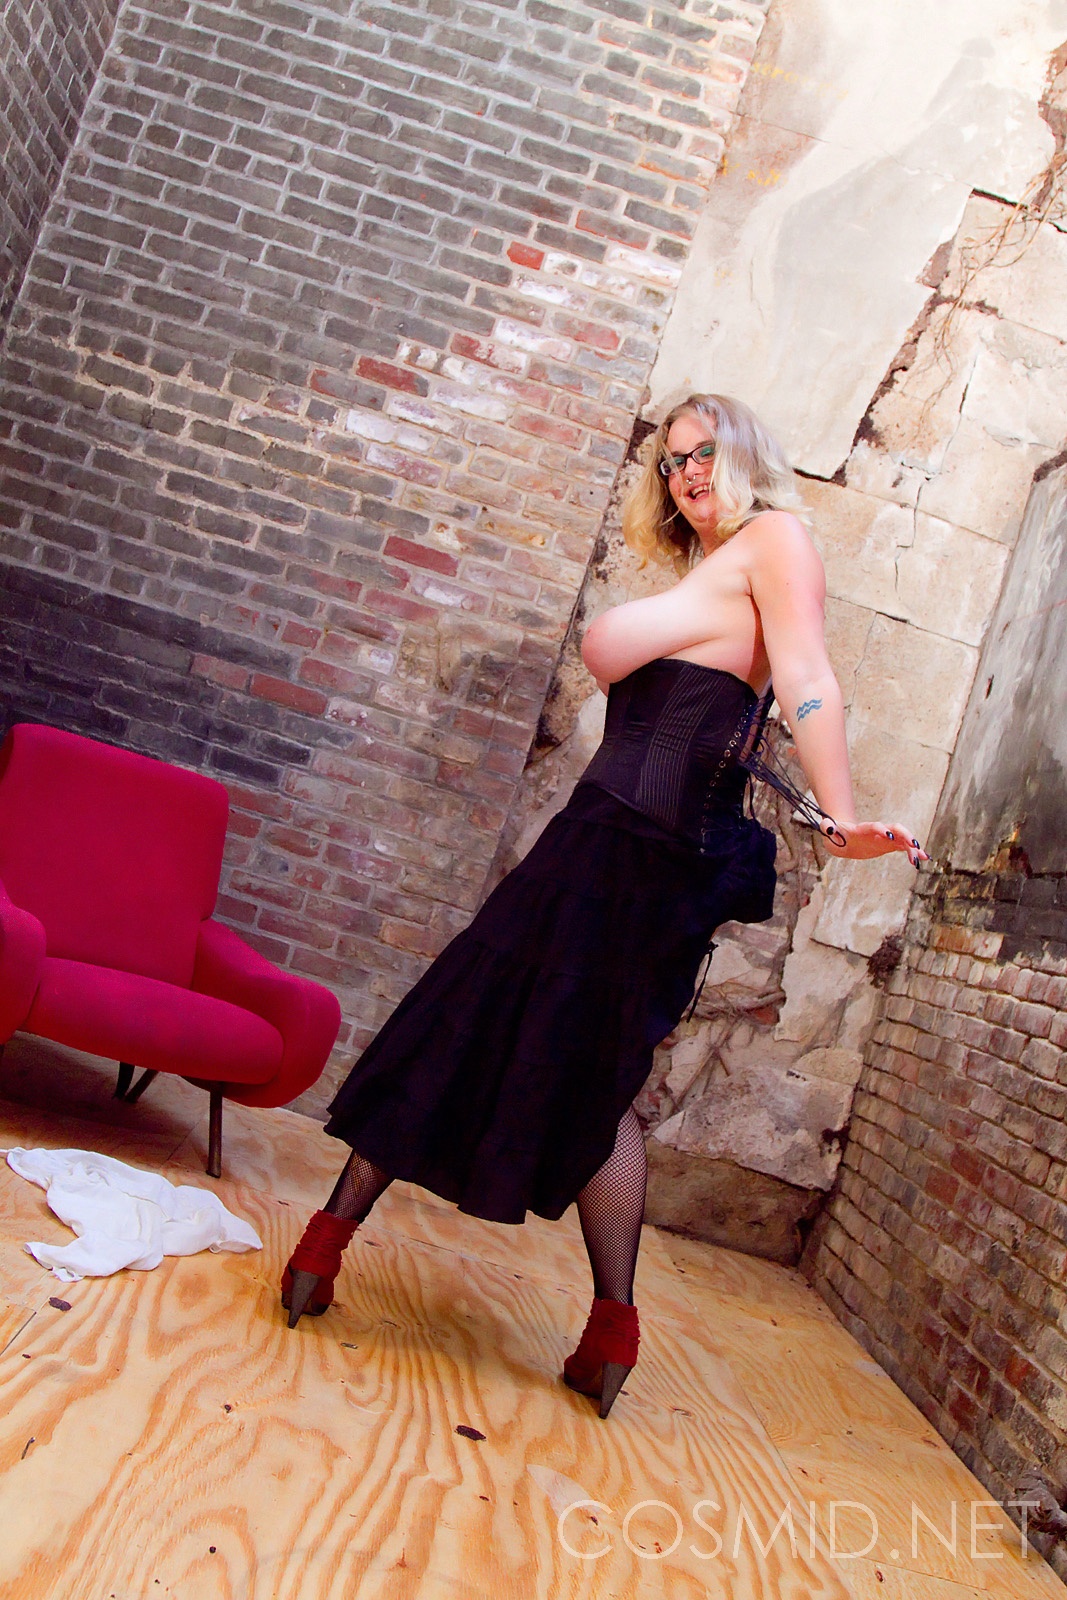 wpid-bespectacled-blonde-bbw-isadore-takes-off-her-corset-and-dress-to-post-in-her-stockings-and-heels12.jpg